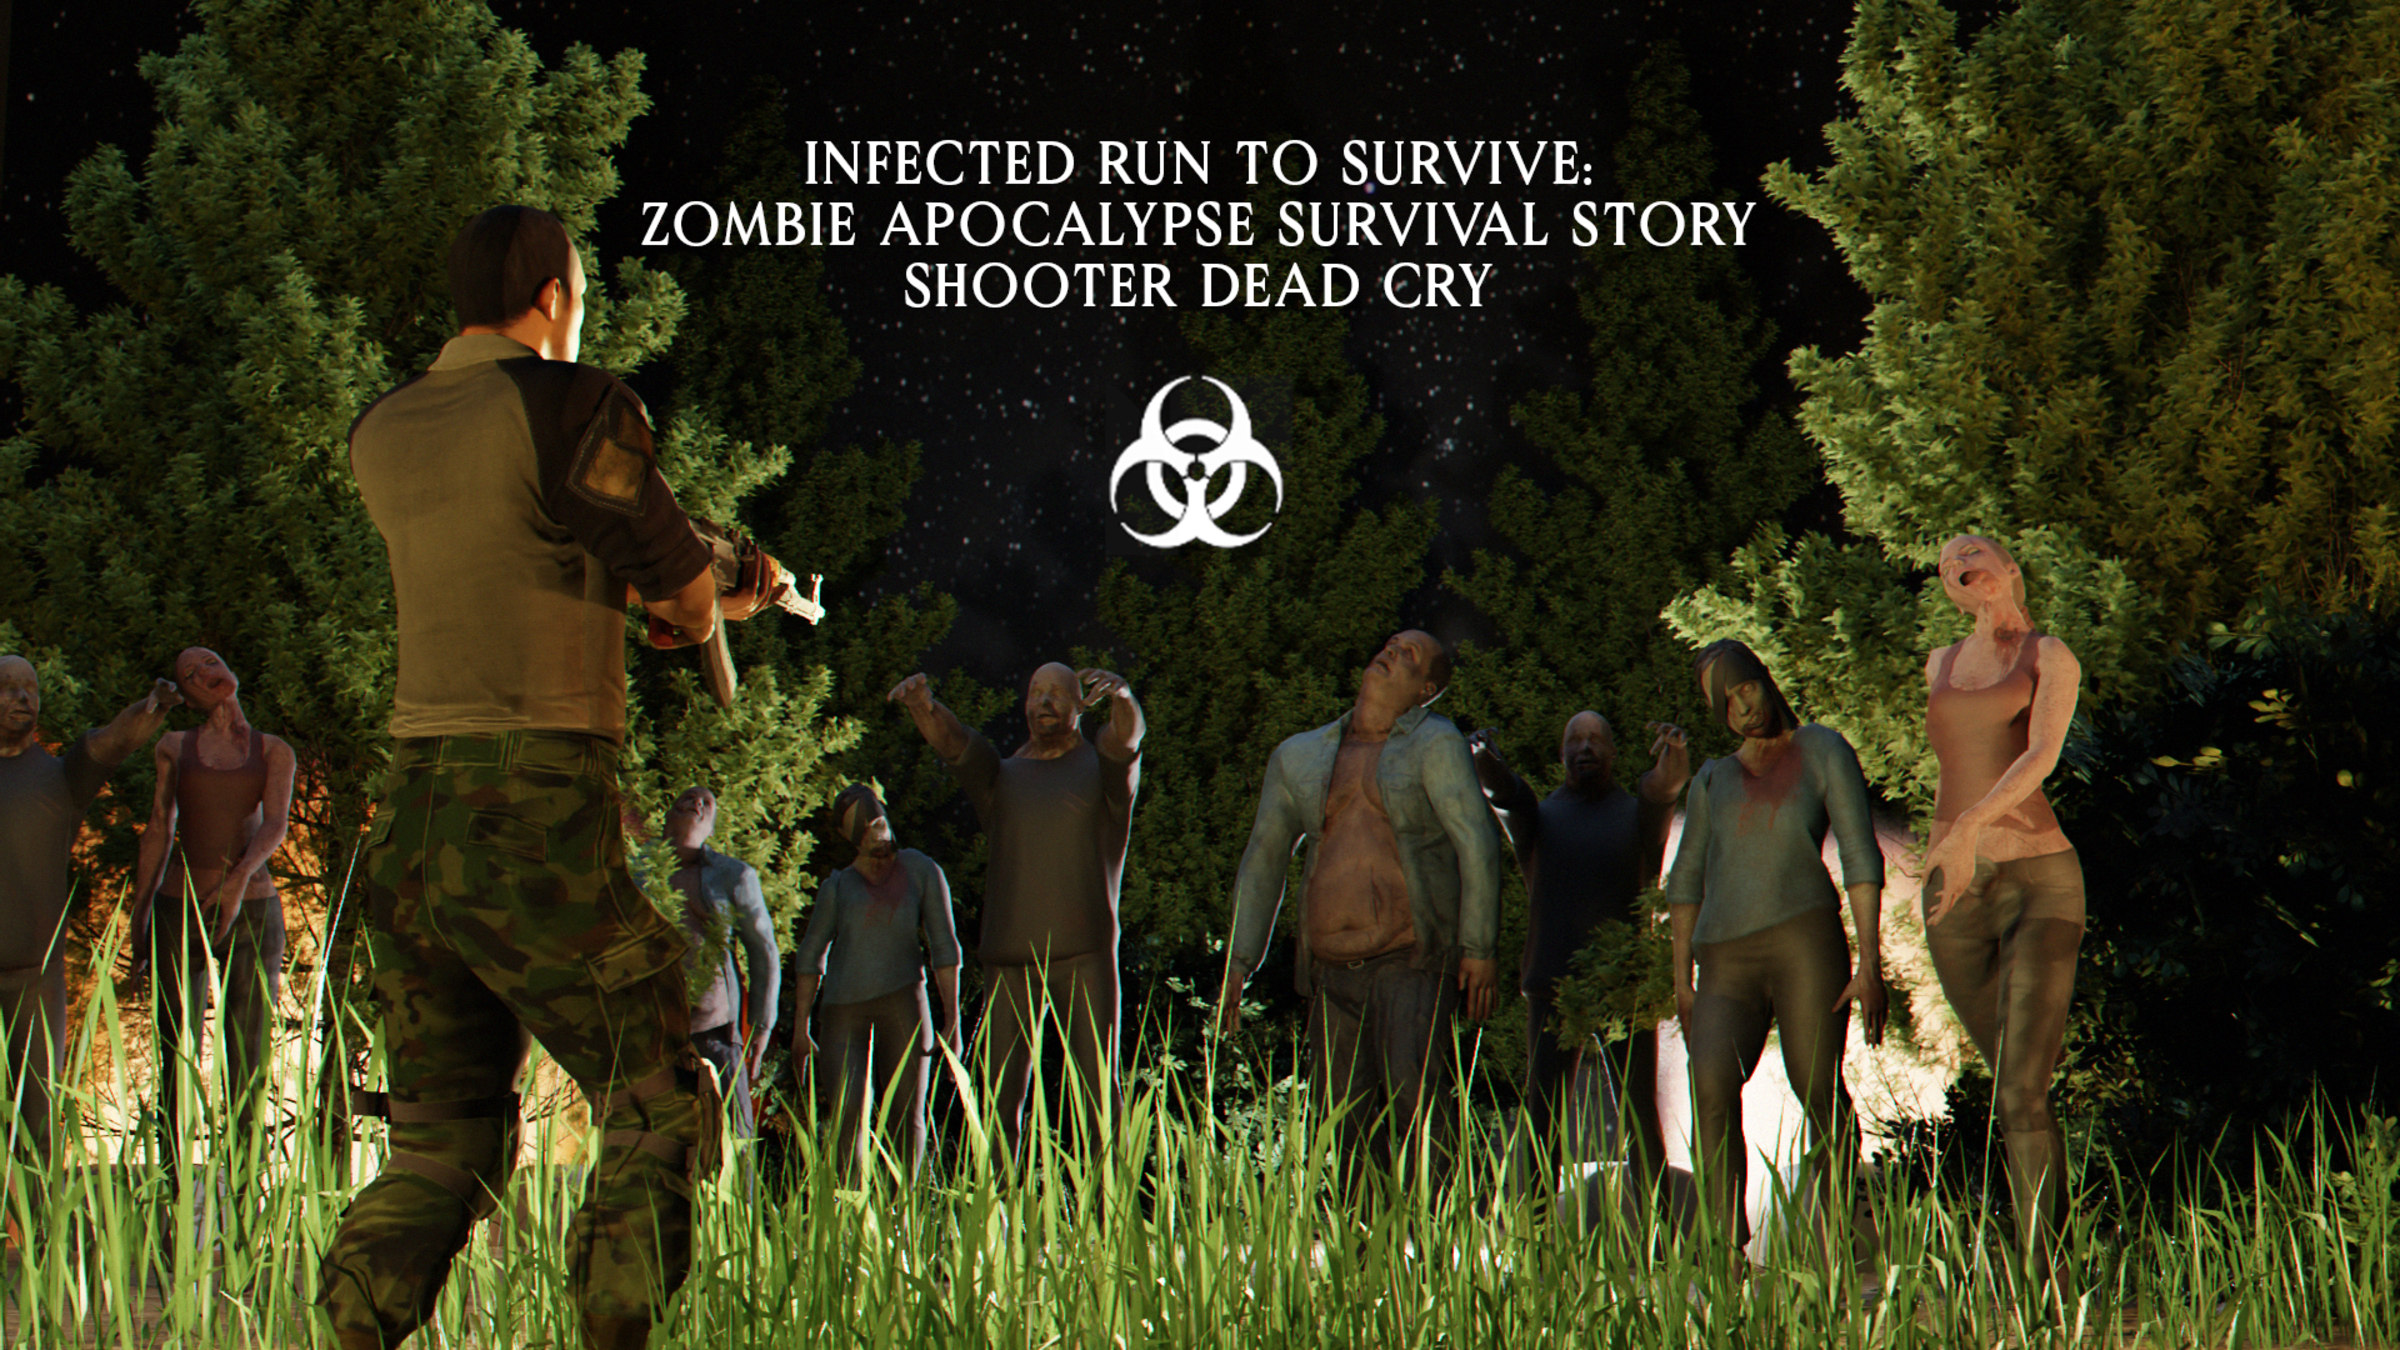 Infected run to Survive Zombie Apocalypse Survival Story Shooter Dead Cry for Nintendo Switch